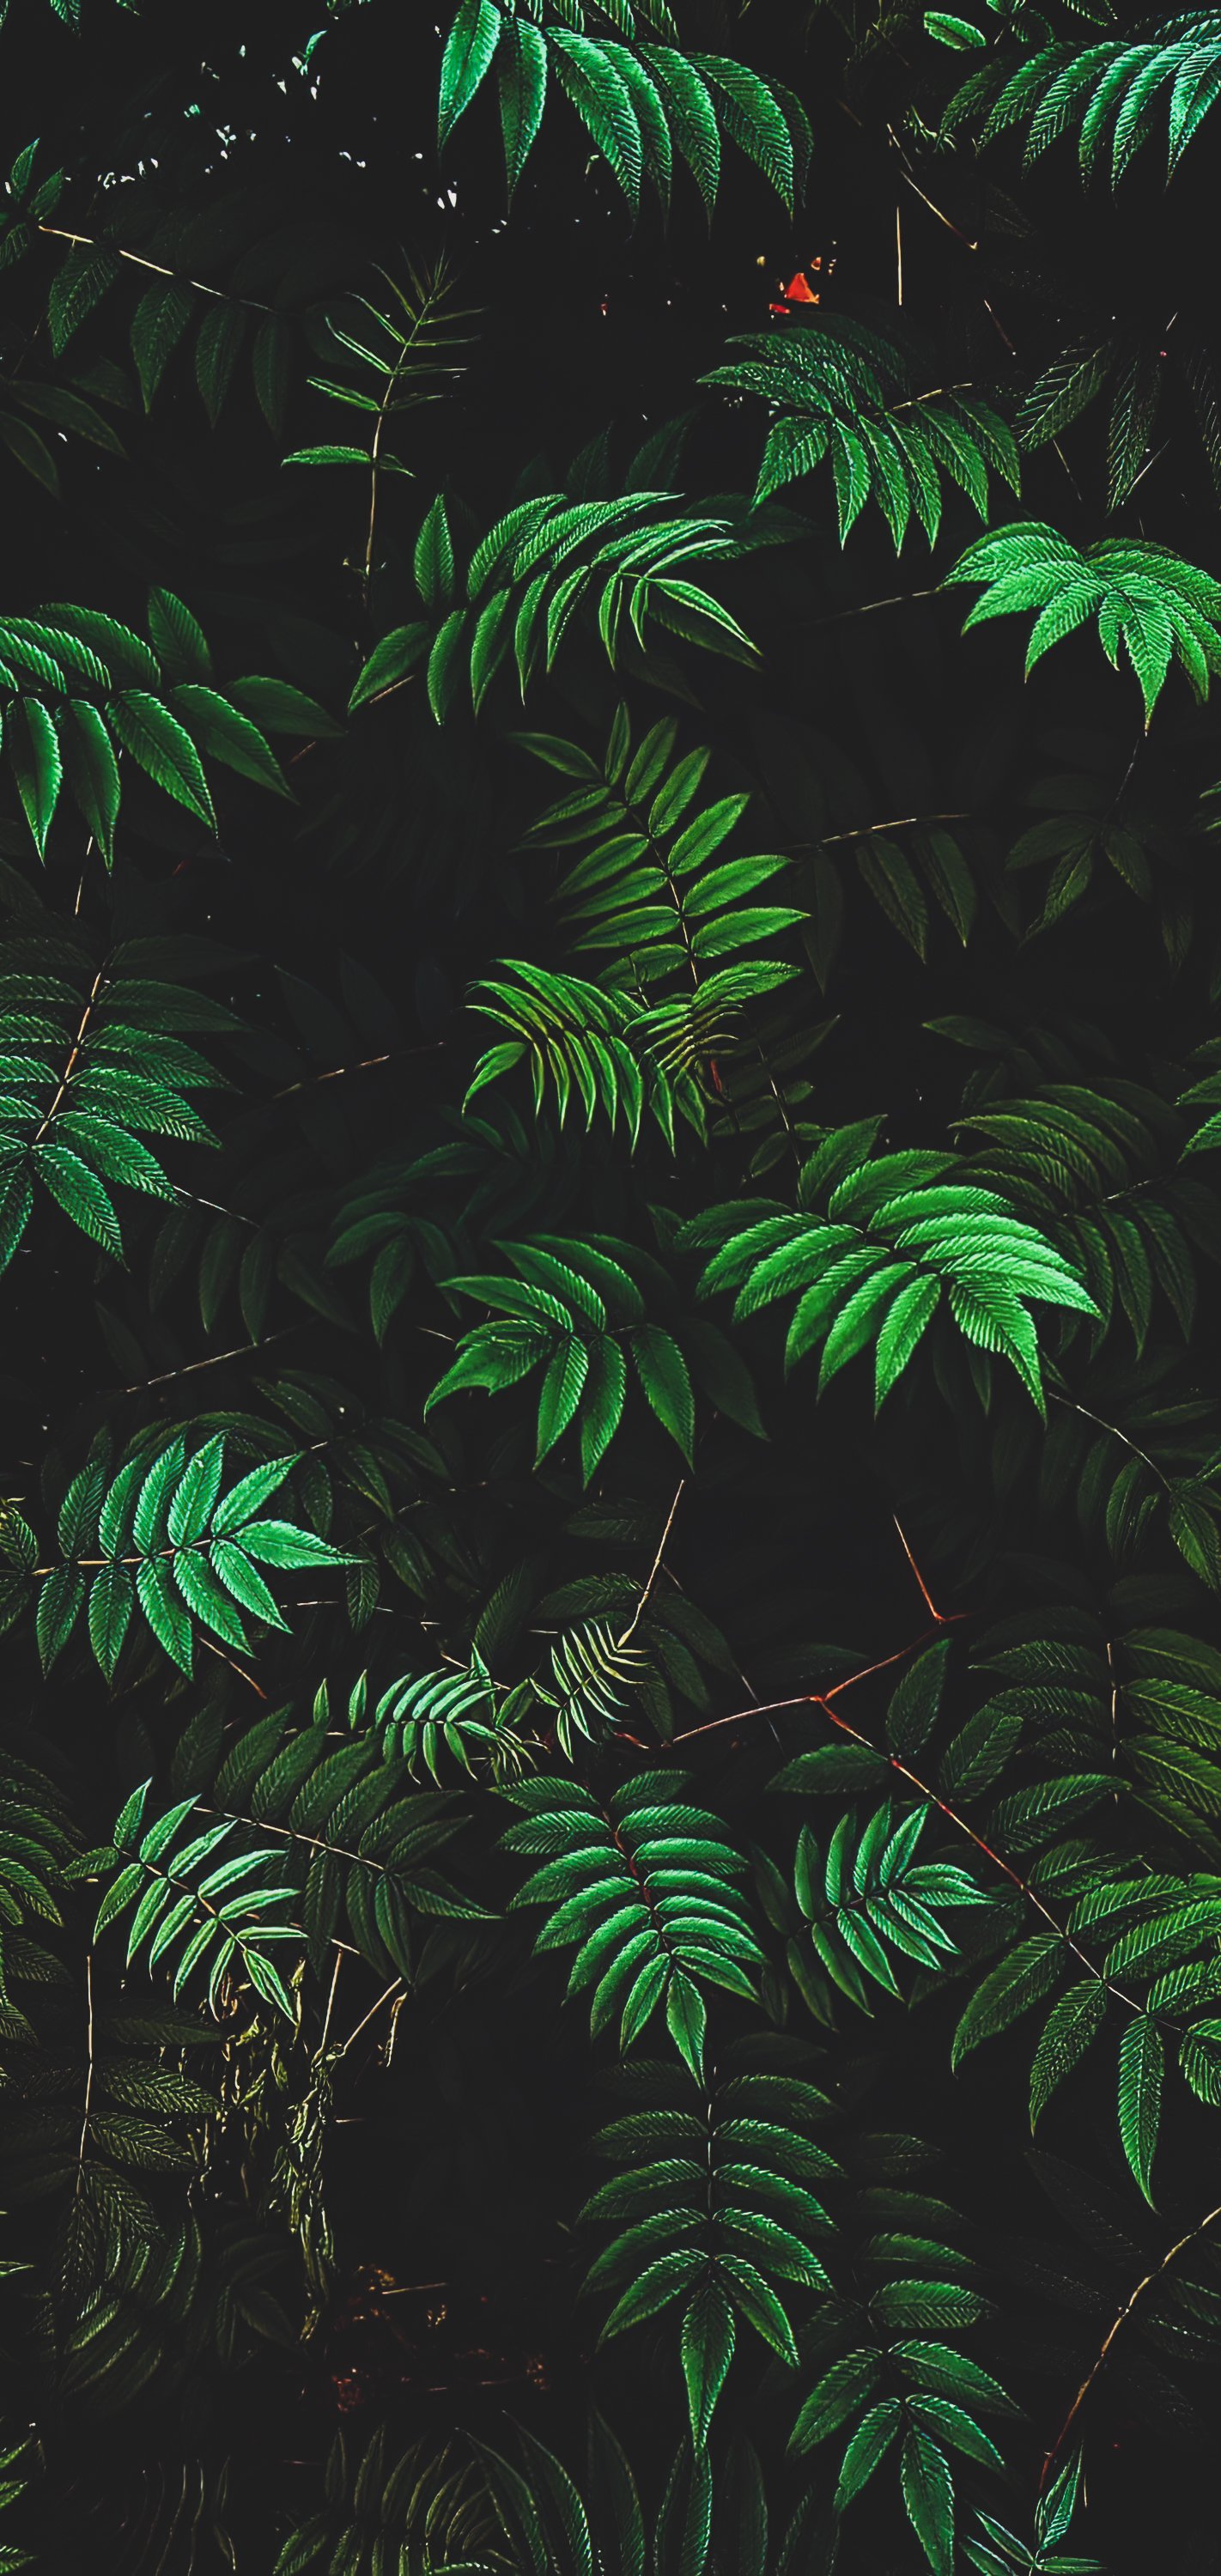 iPhone and Android Wallpapers: Green Leaves Wallpaper for iPhone and  Android | Green leaf wallpaper, Fern wallpaper, Leaf wallpaper